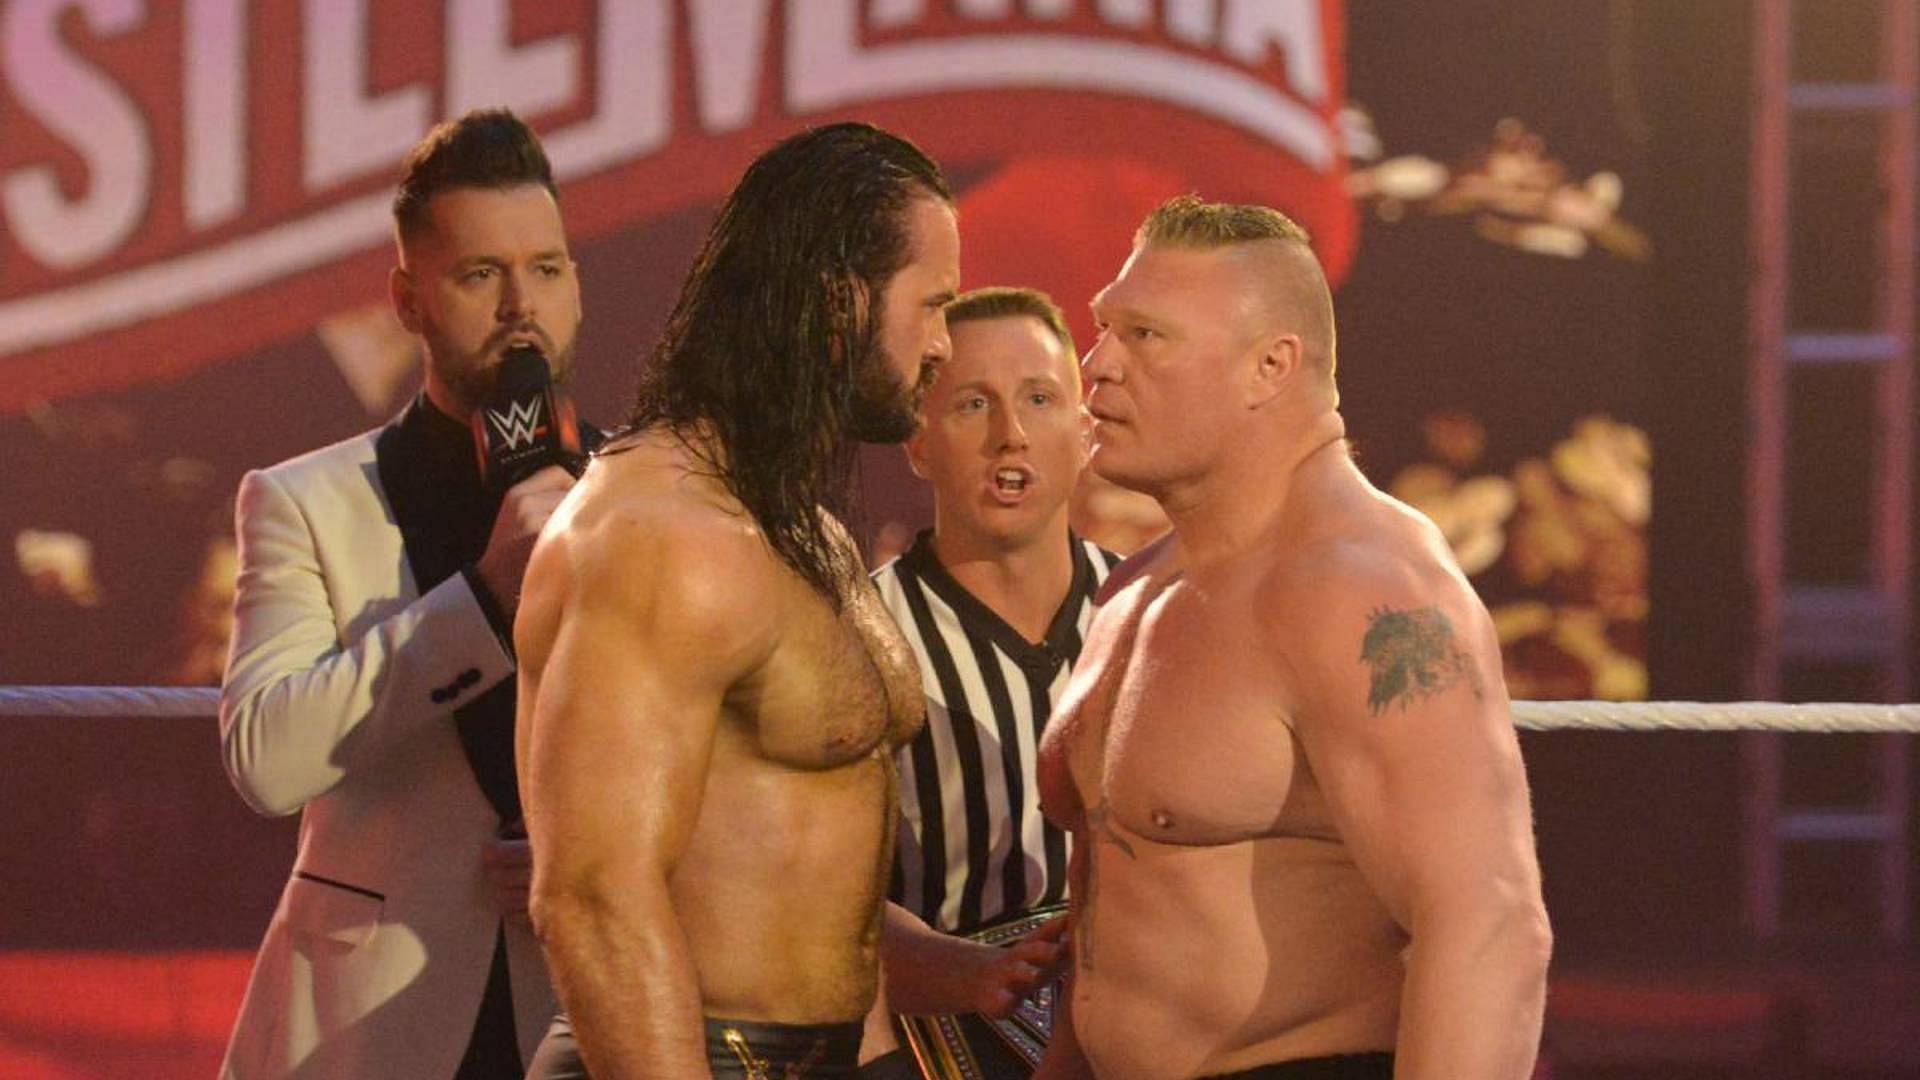 Crown Jewel could benefit from a match between Lesnar and McIntyre